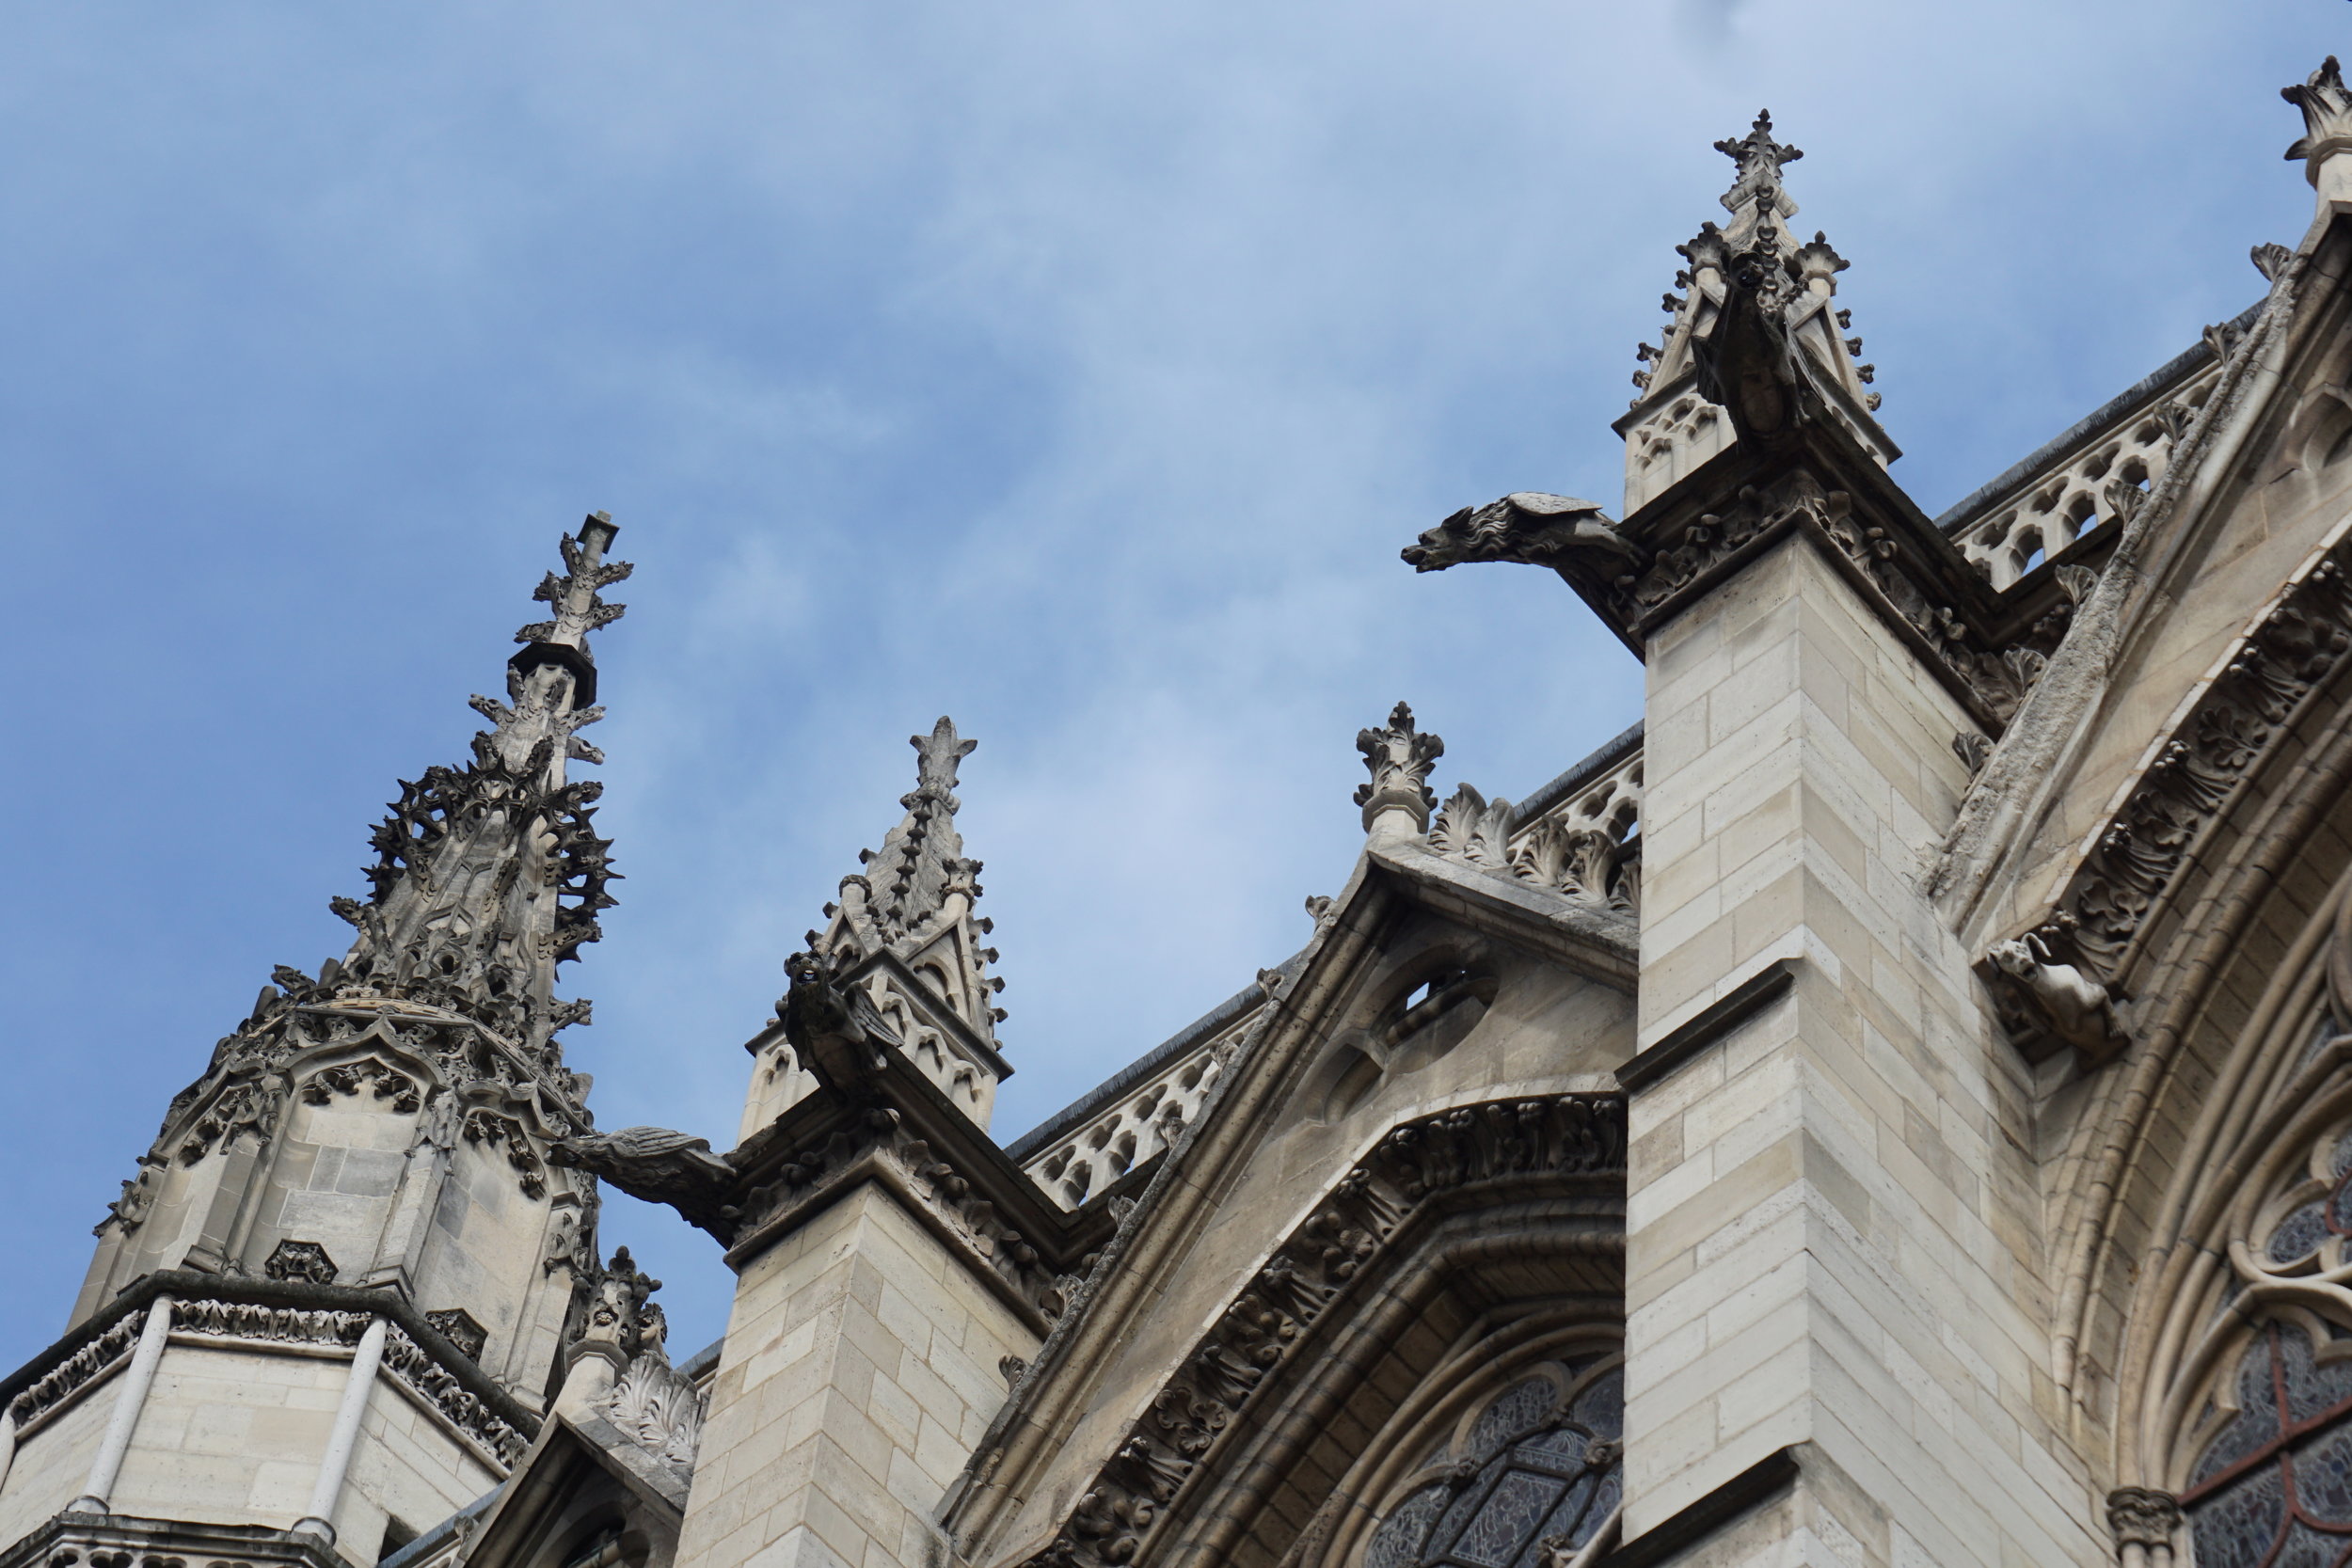  More gargoyles.  There are never repeats.  They all differ. 